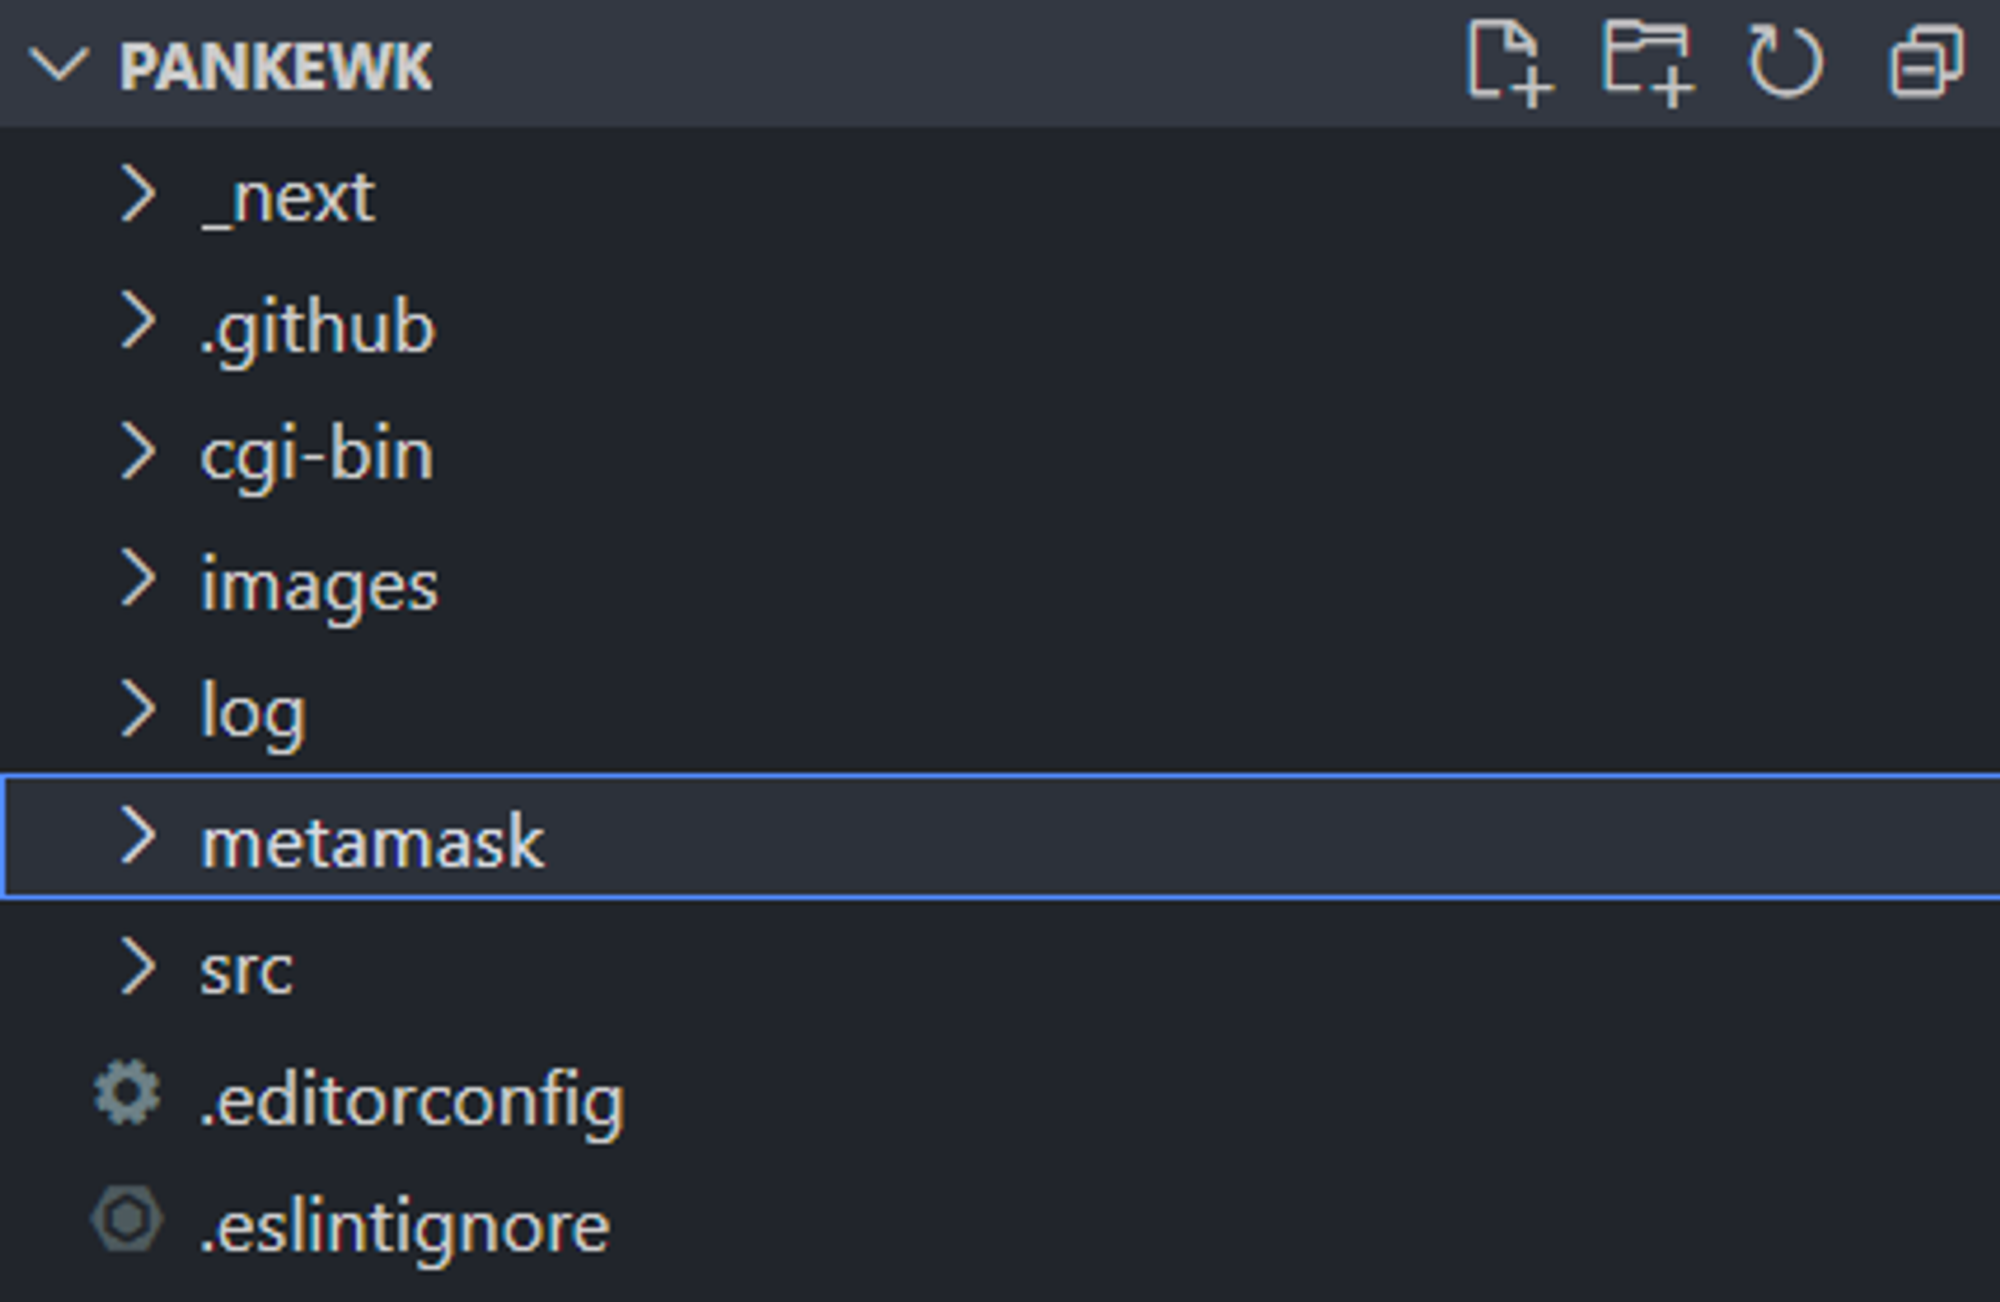 There is a folder especially for Metamask, which makes it suspicious already 👀